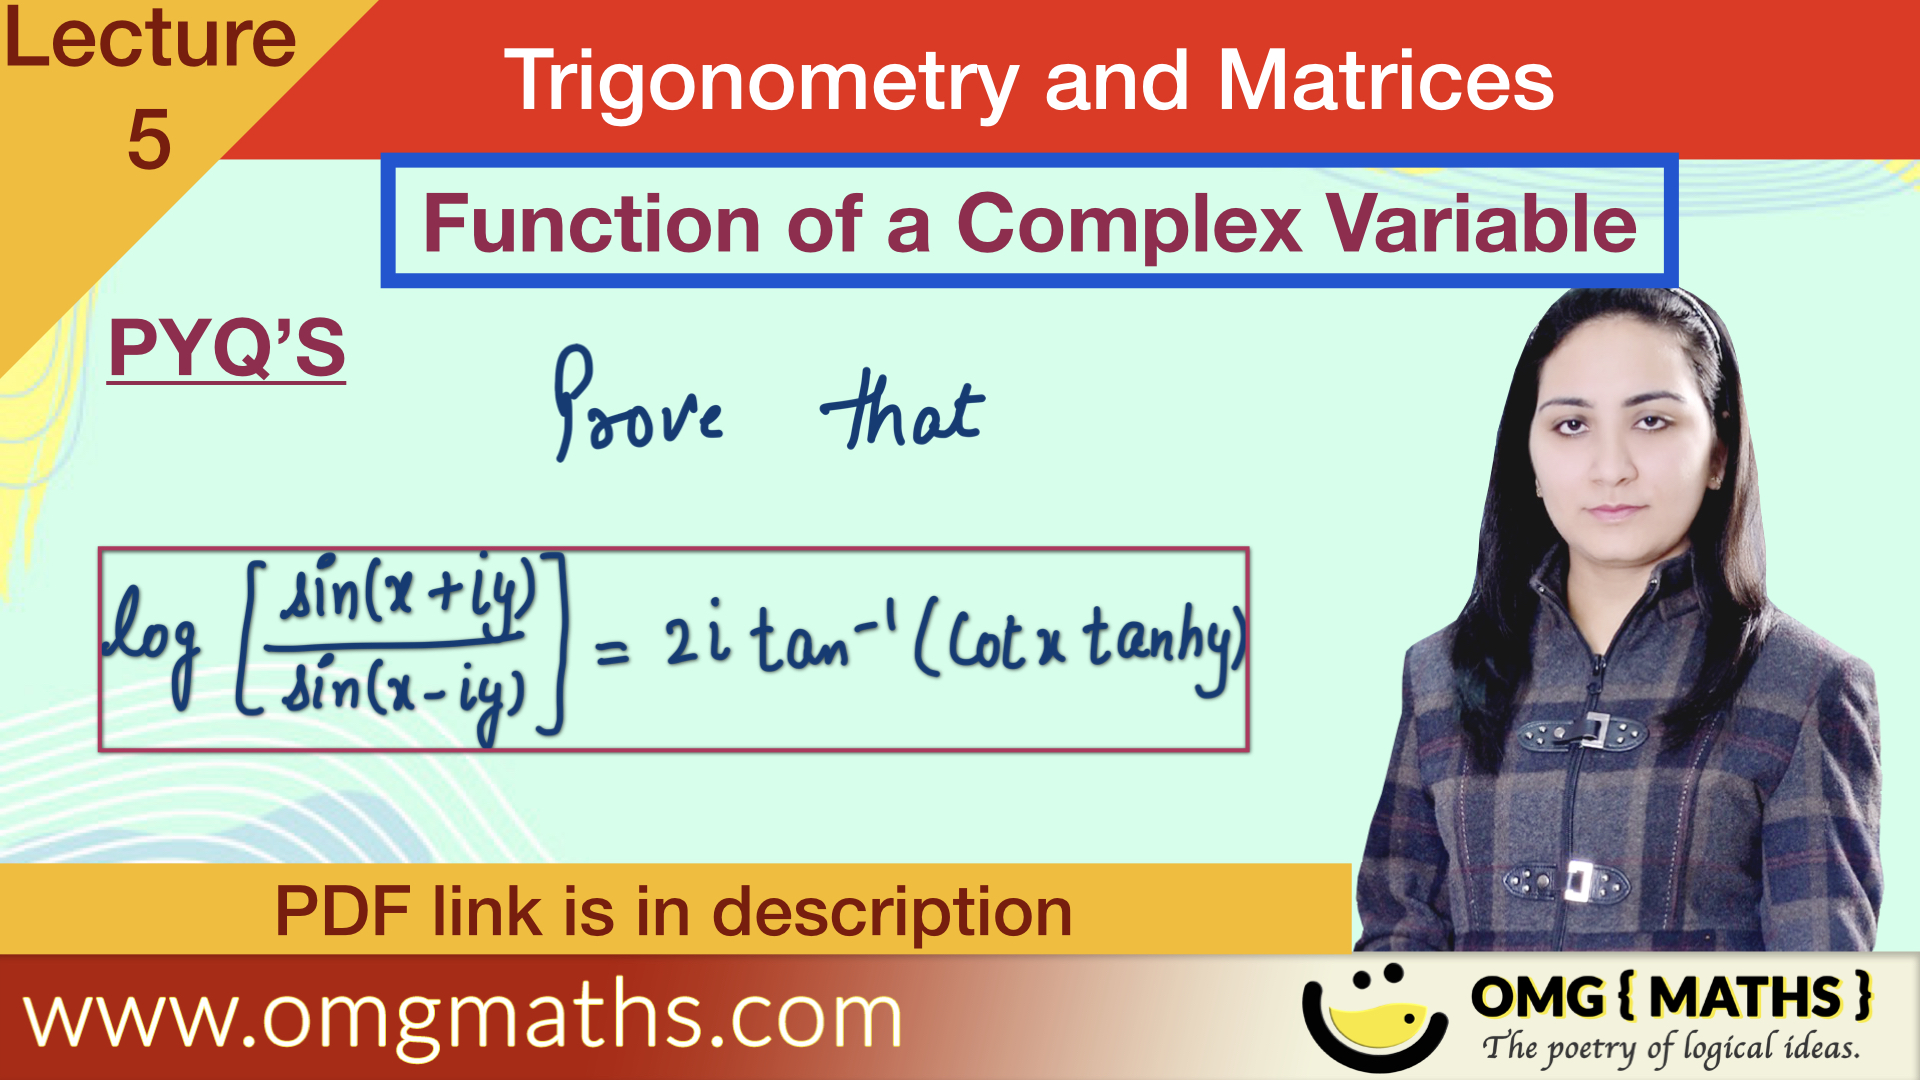 Log[sin(x+iy)/sin(x-iy)] = 2itan^-1(cosx+tanhy) | Function of a complex variable | pyq | Bsc | Trigonometry and Matrices